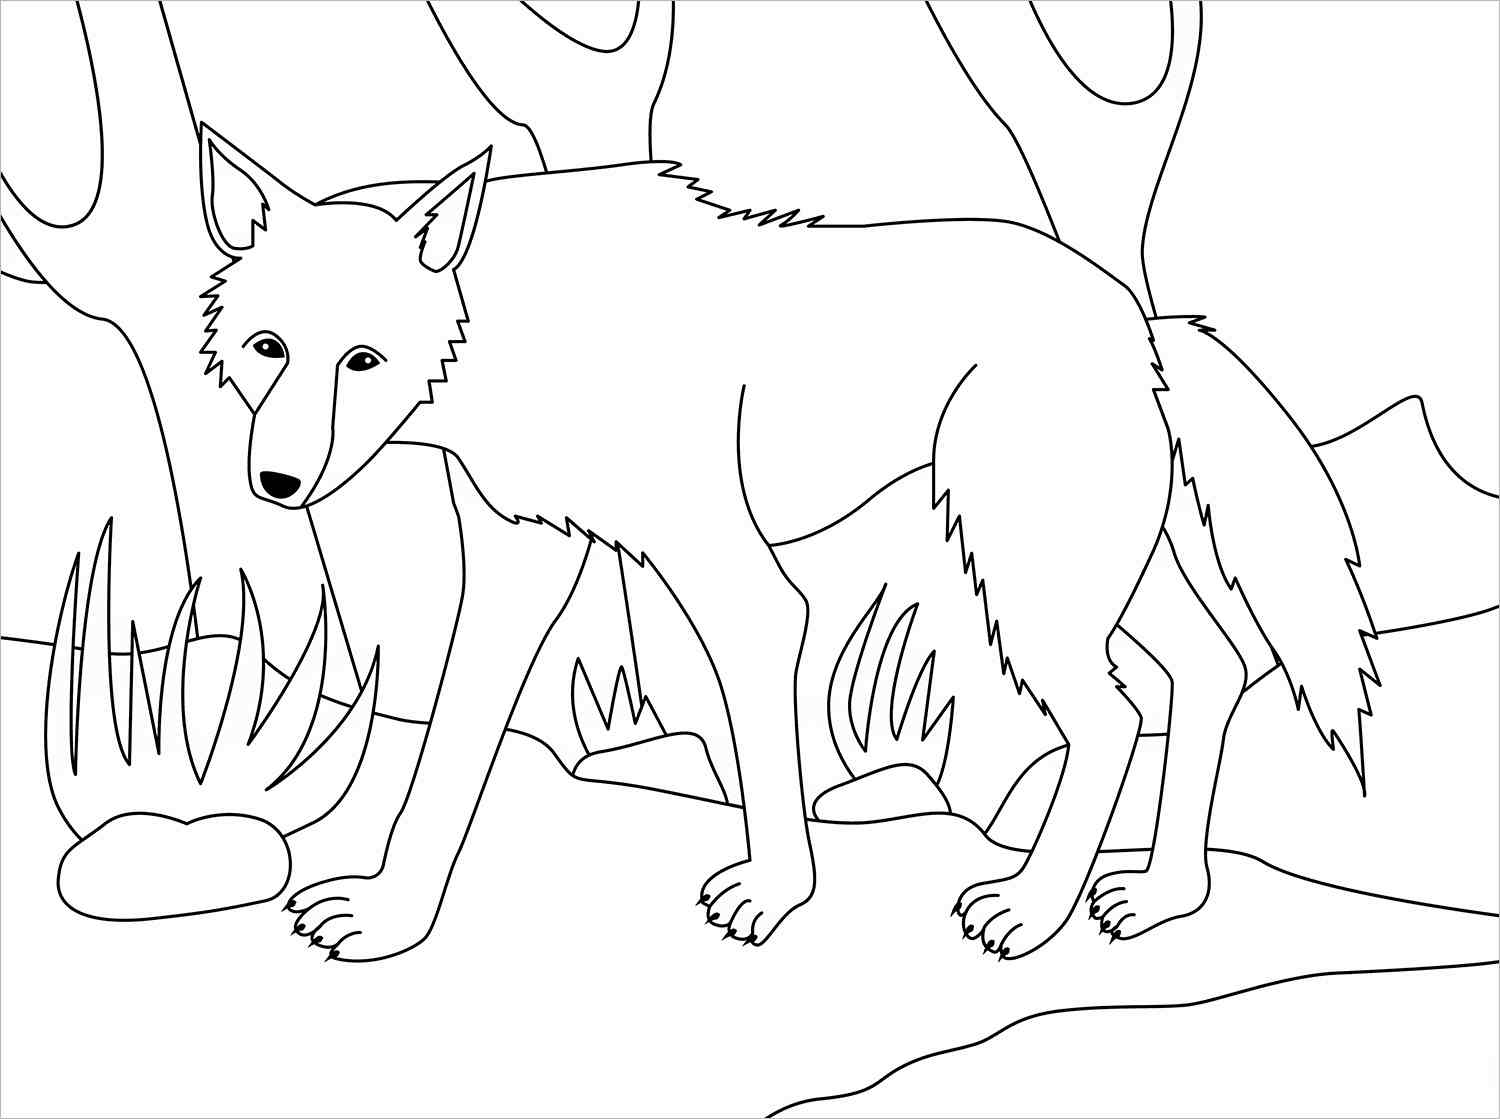 The wolf goes wandering in the woods Coloring Page